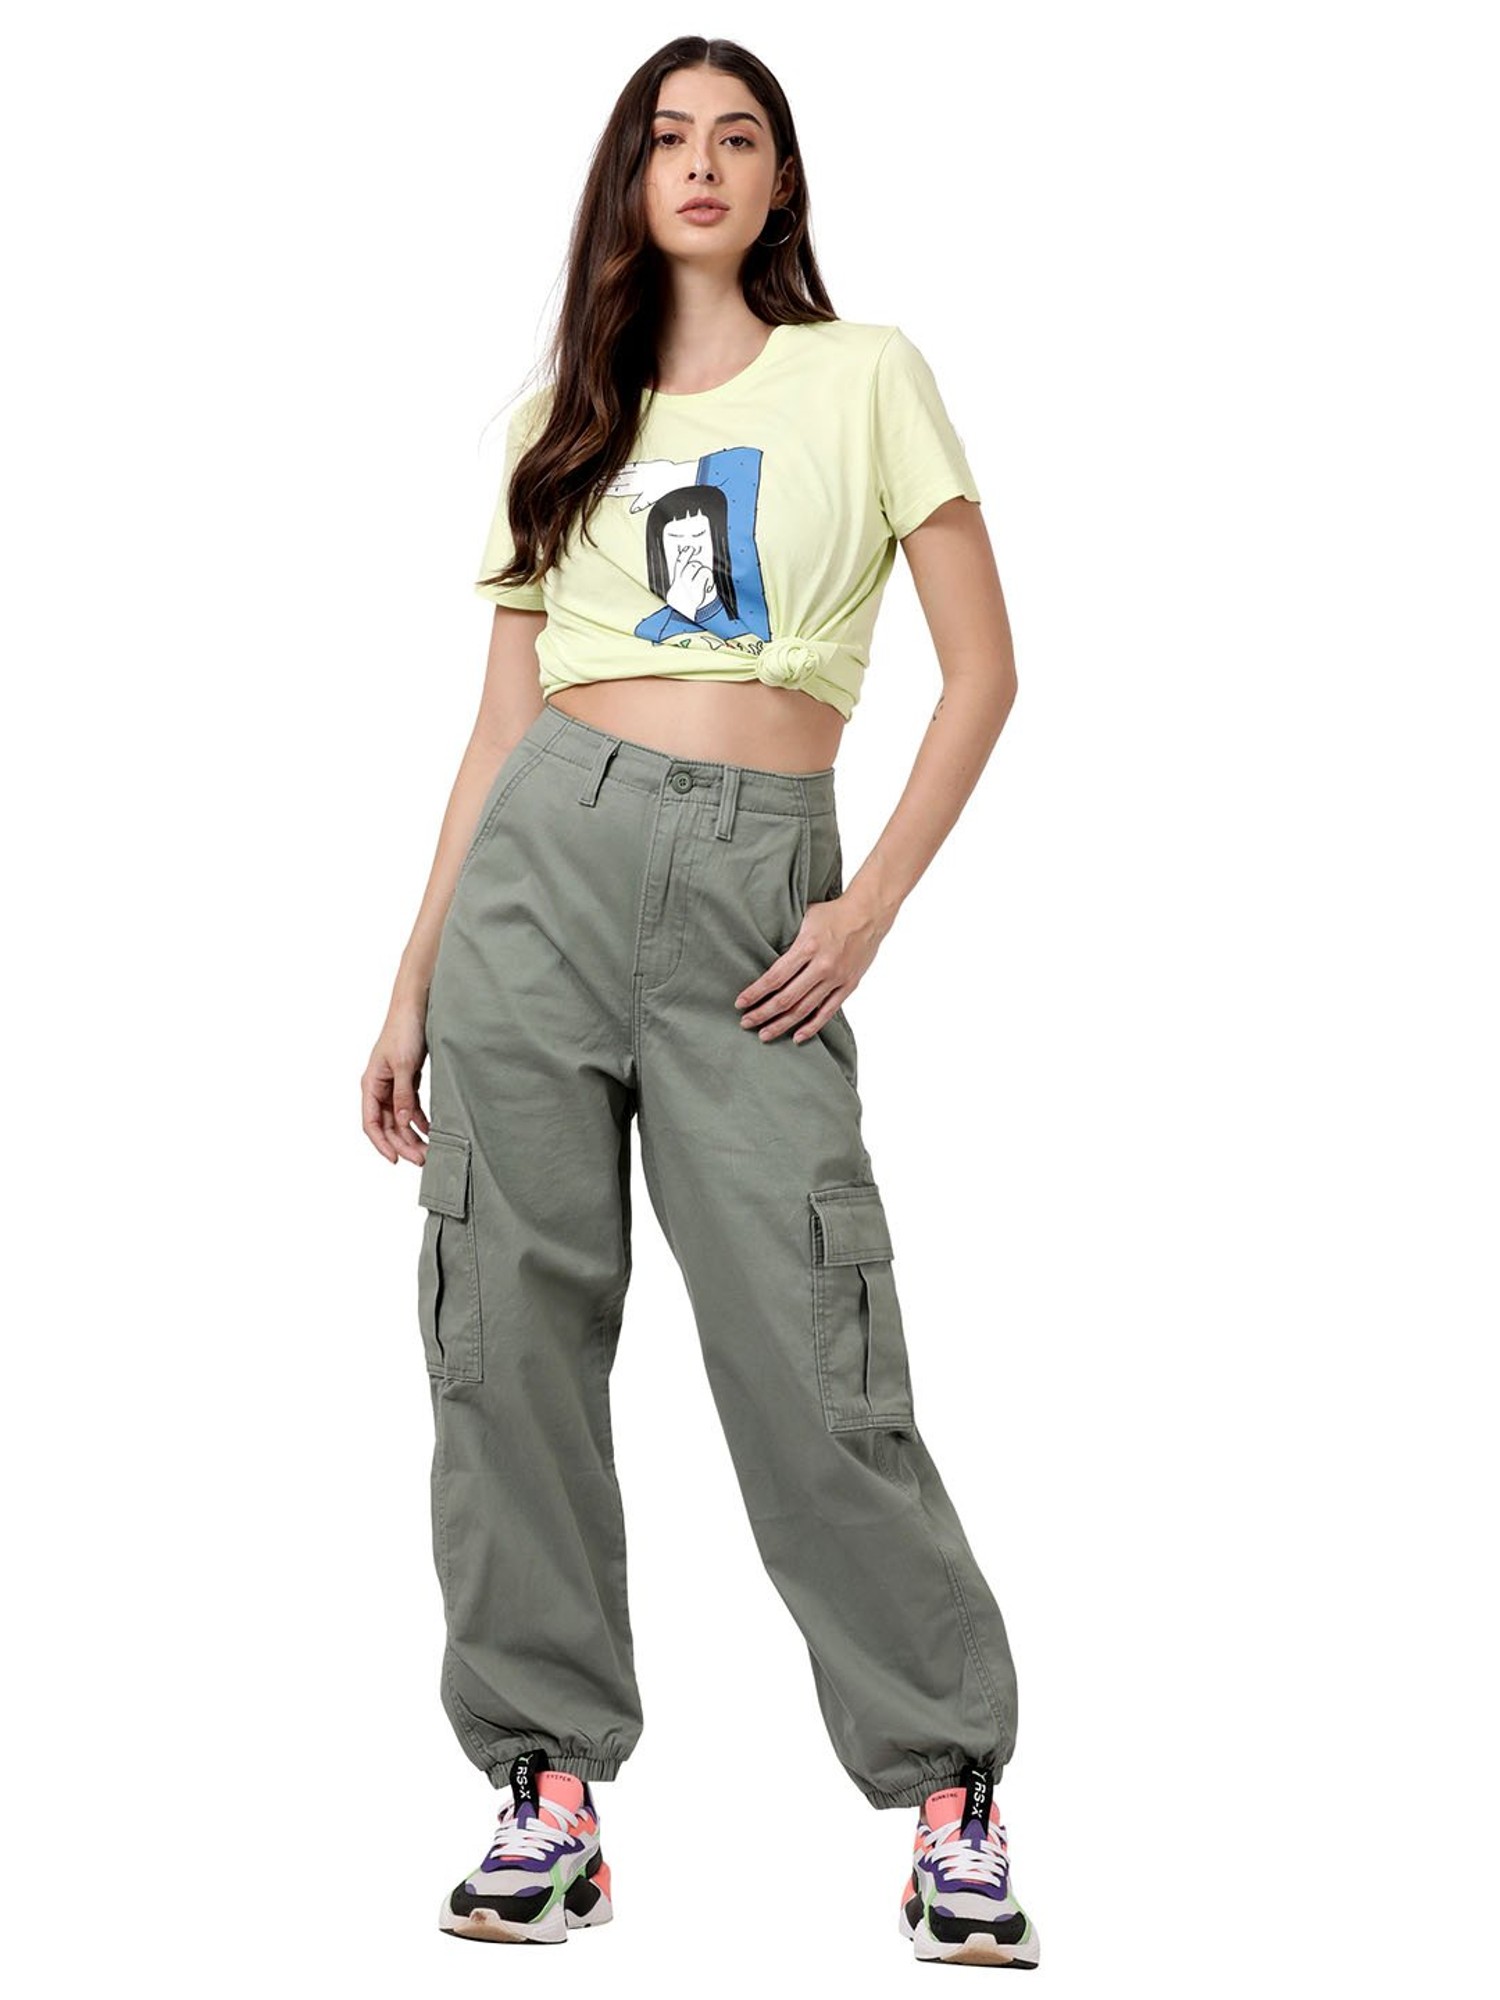 Women Black Harlan Pants Ladies Cargo Pants Skinny Pants Girls Overalls  Casual Trousers  China Cargo Pants and Woman price  MadeinChinacom